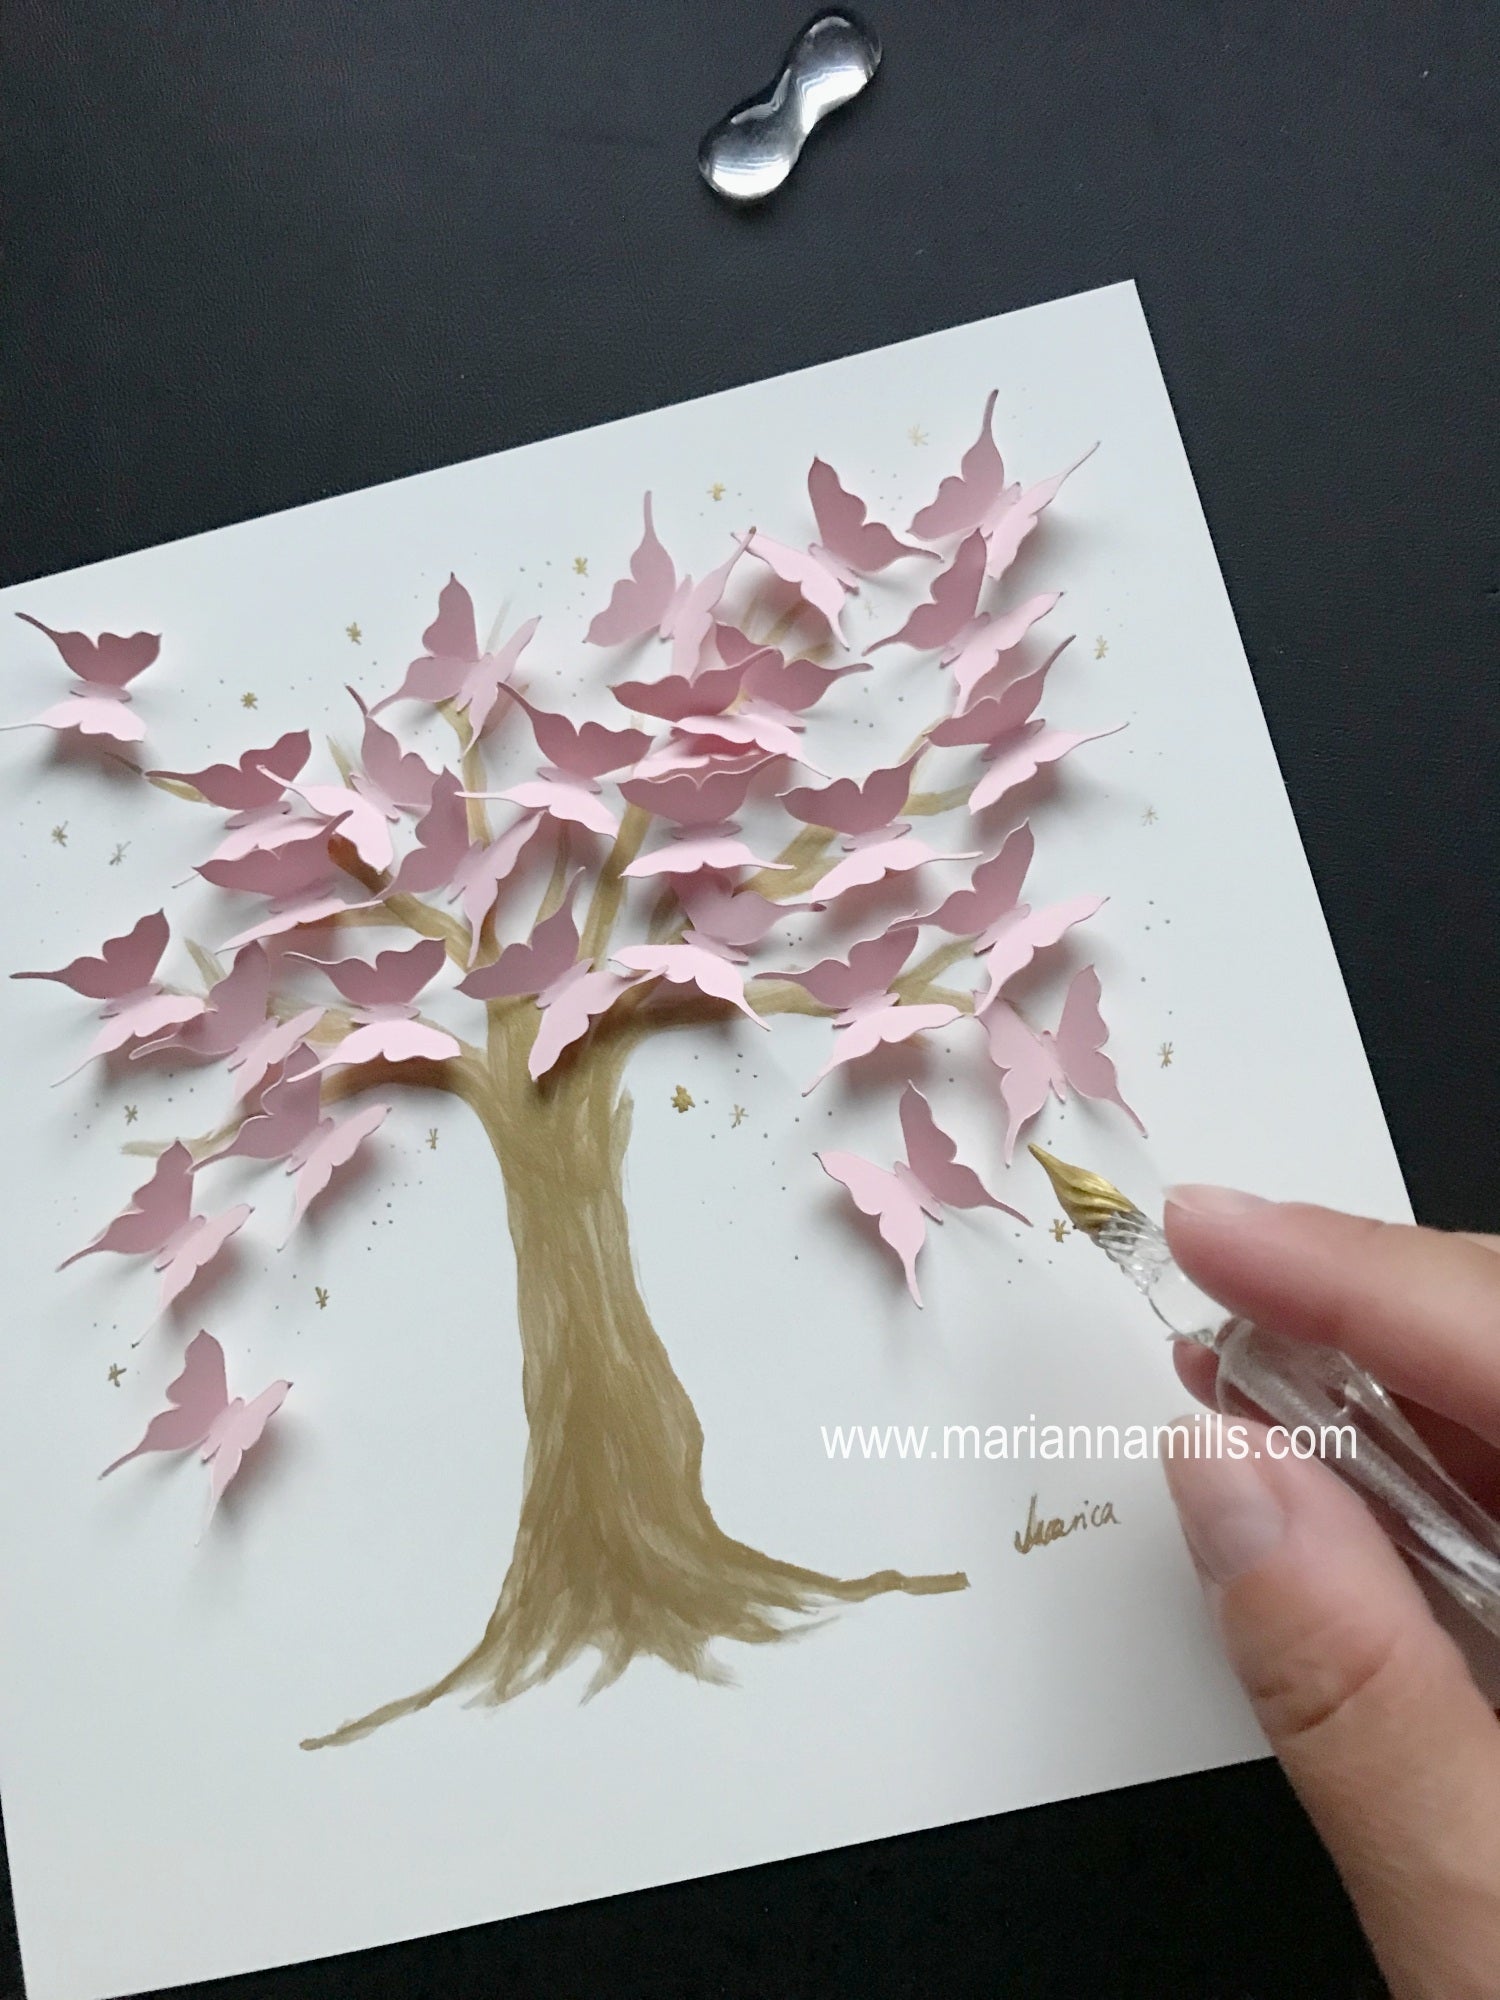 Marianna Mills original mixed media painting Dreaming gold tree trunk tree with pink butterflies